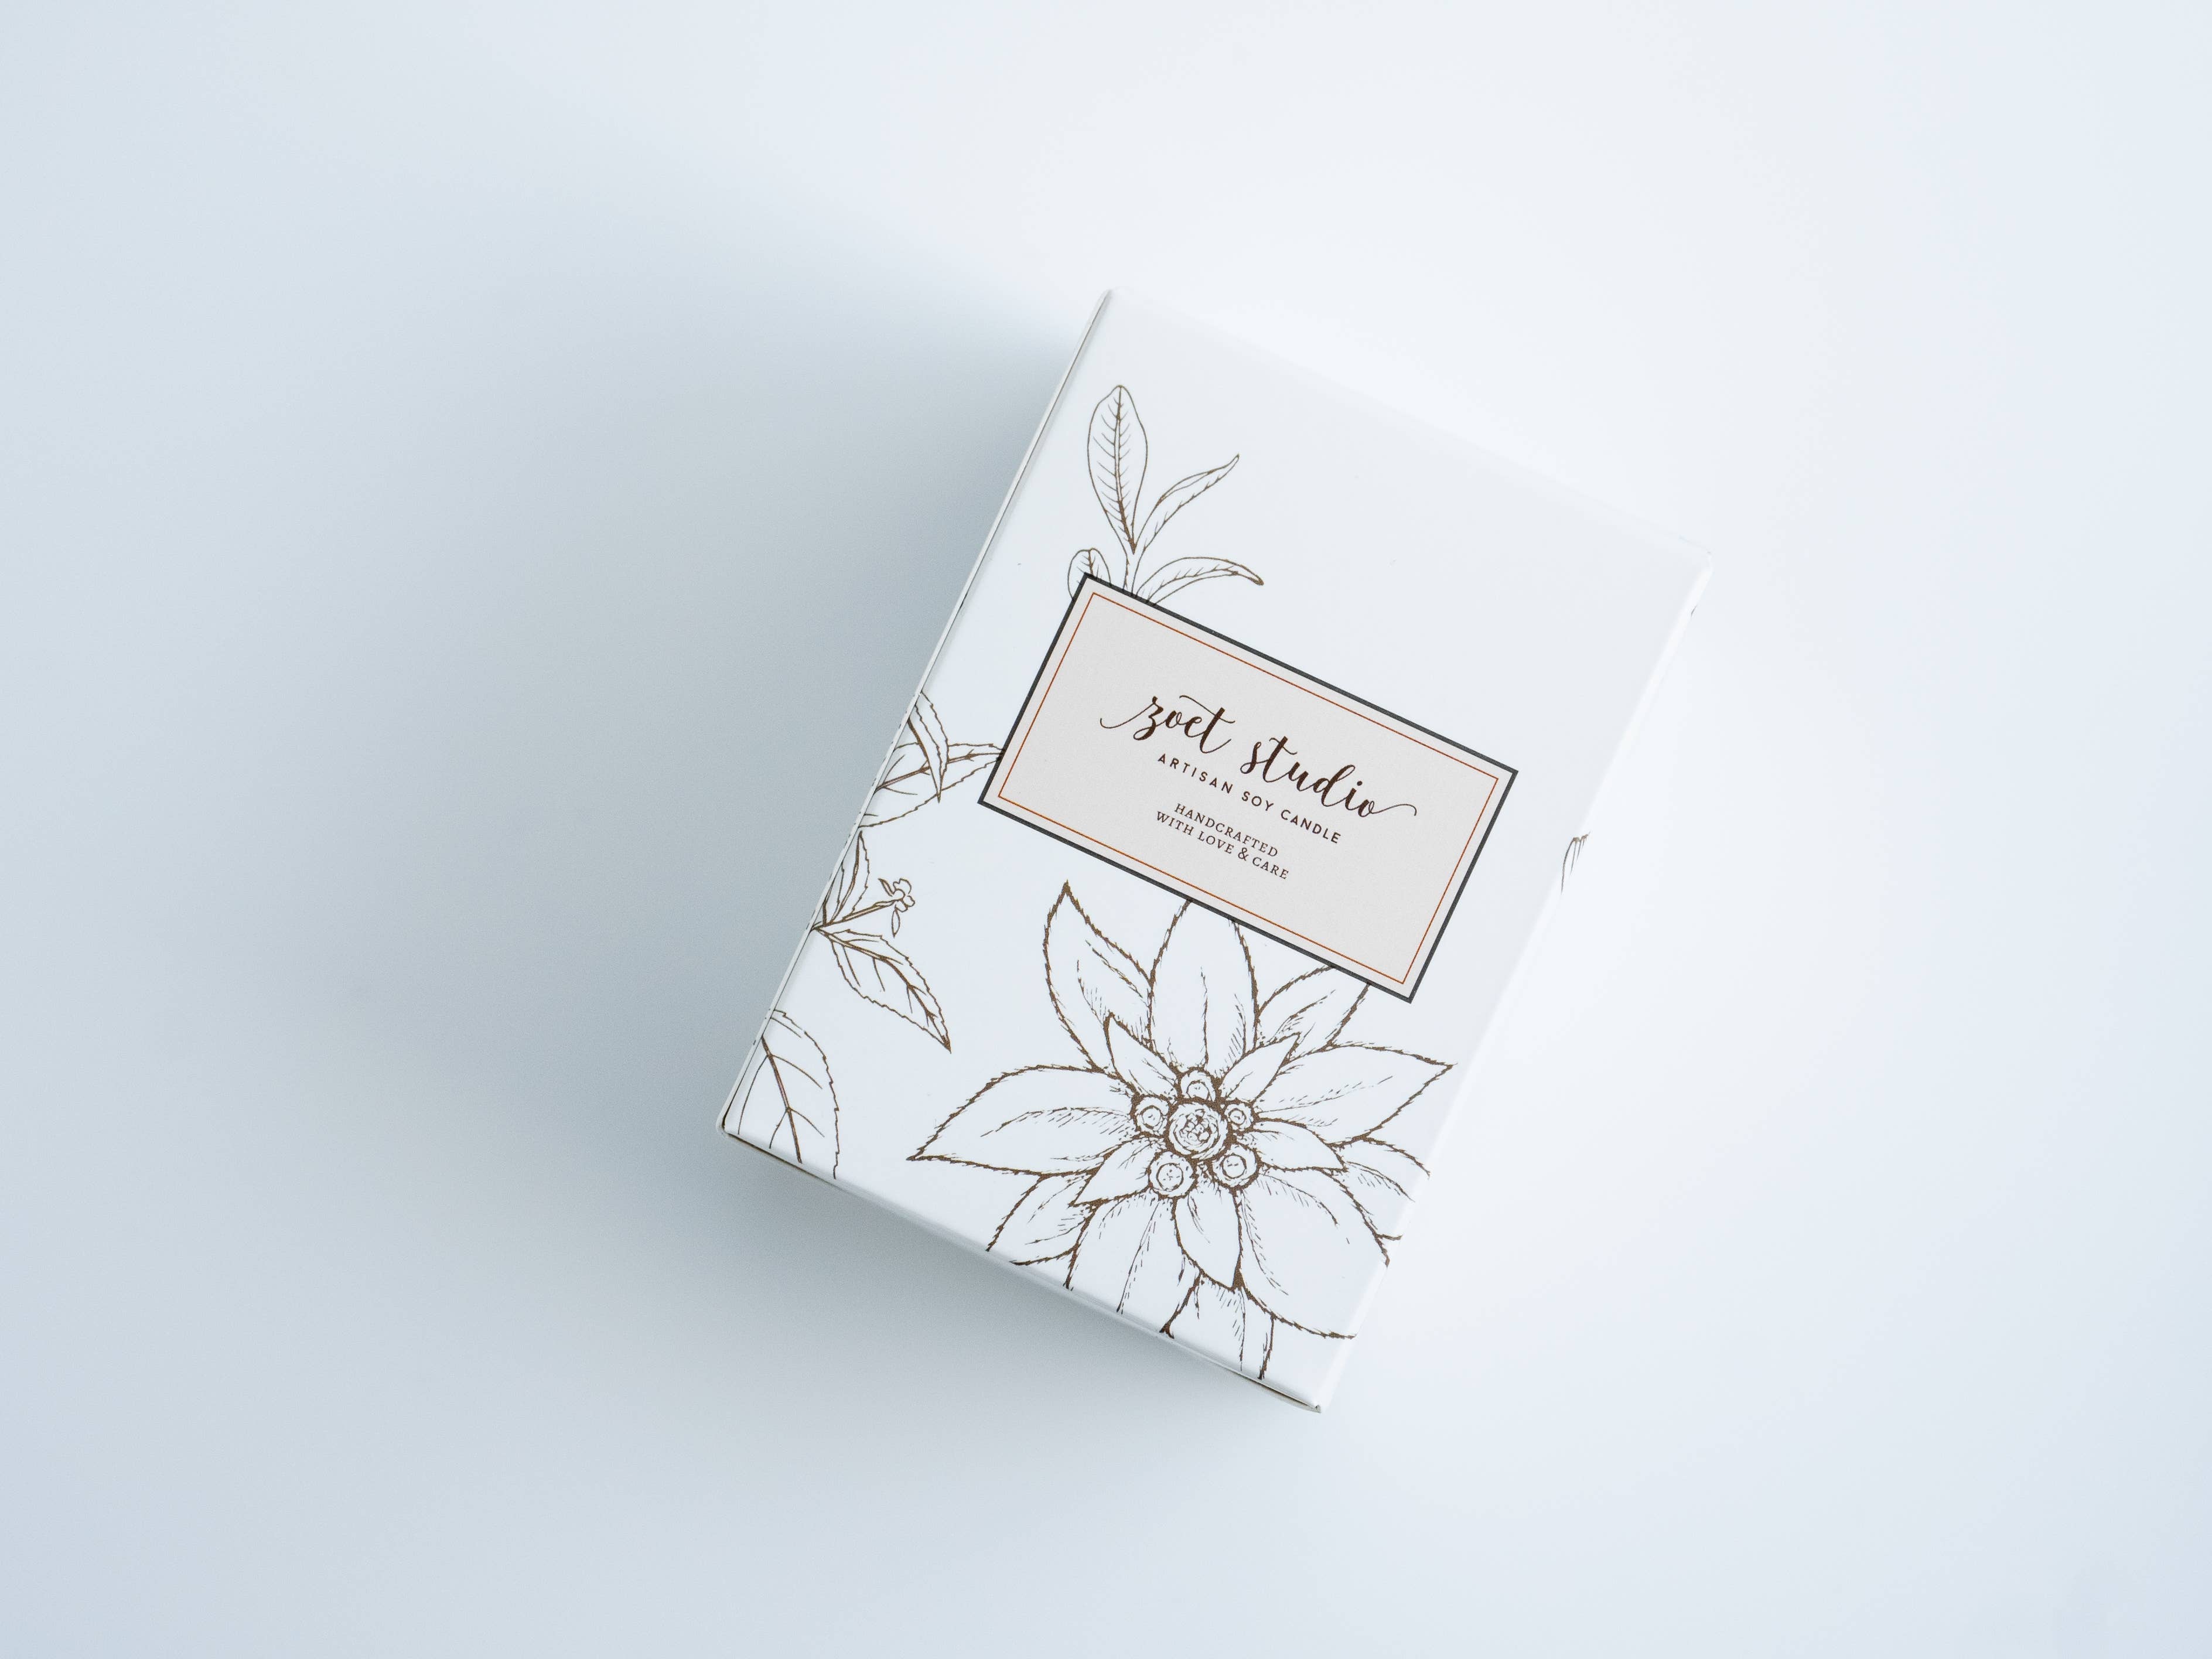 Sunflower Soy Blend Candle | 8.5 oz candle: Peach + Cream